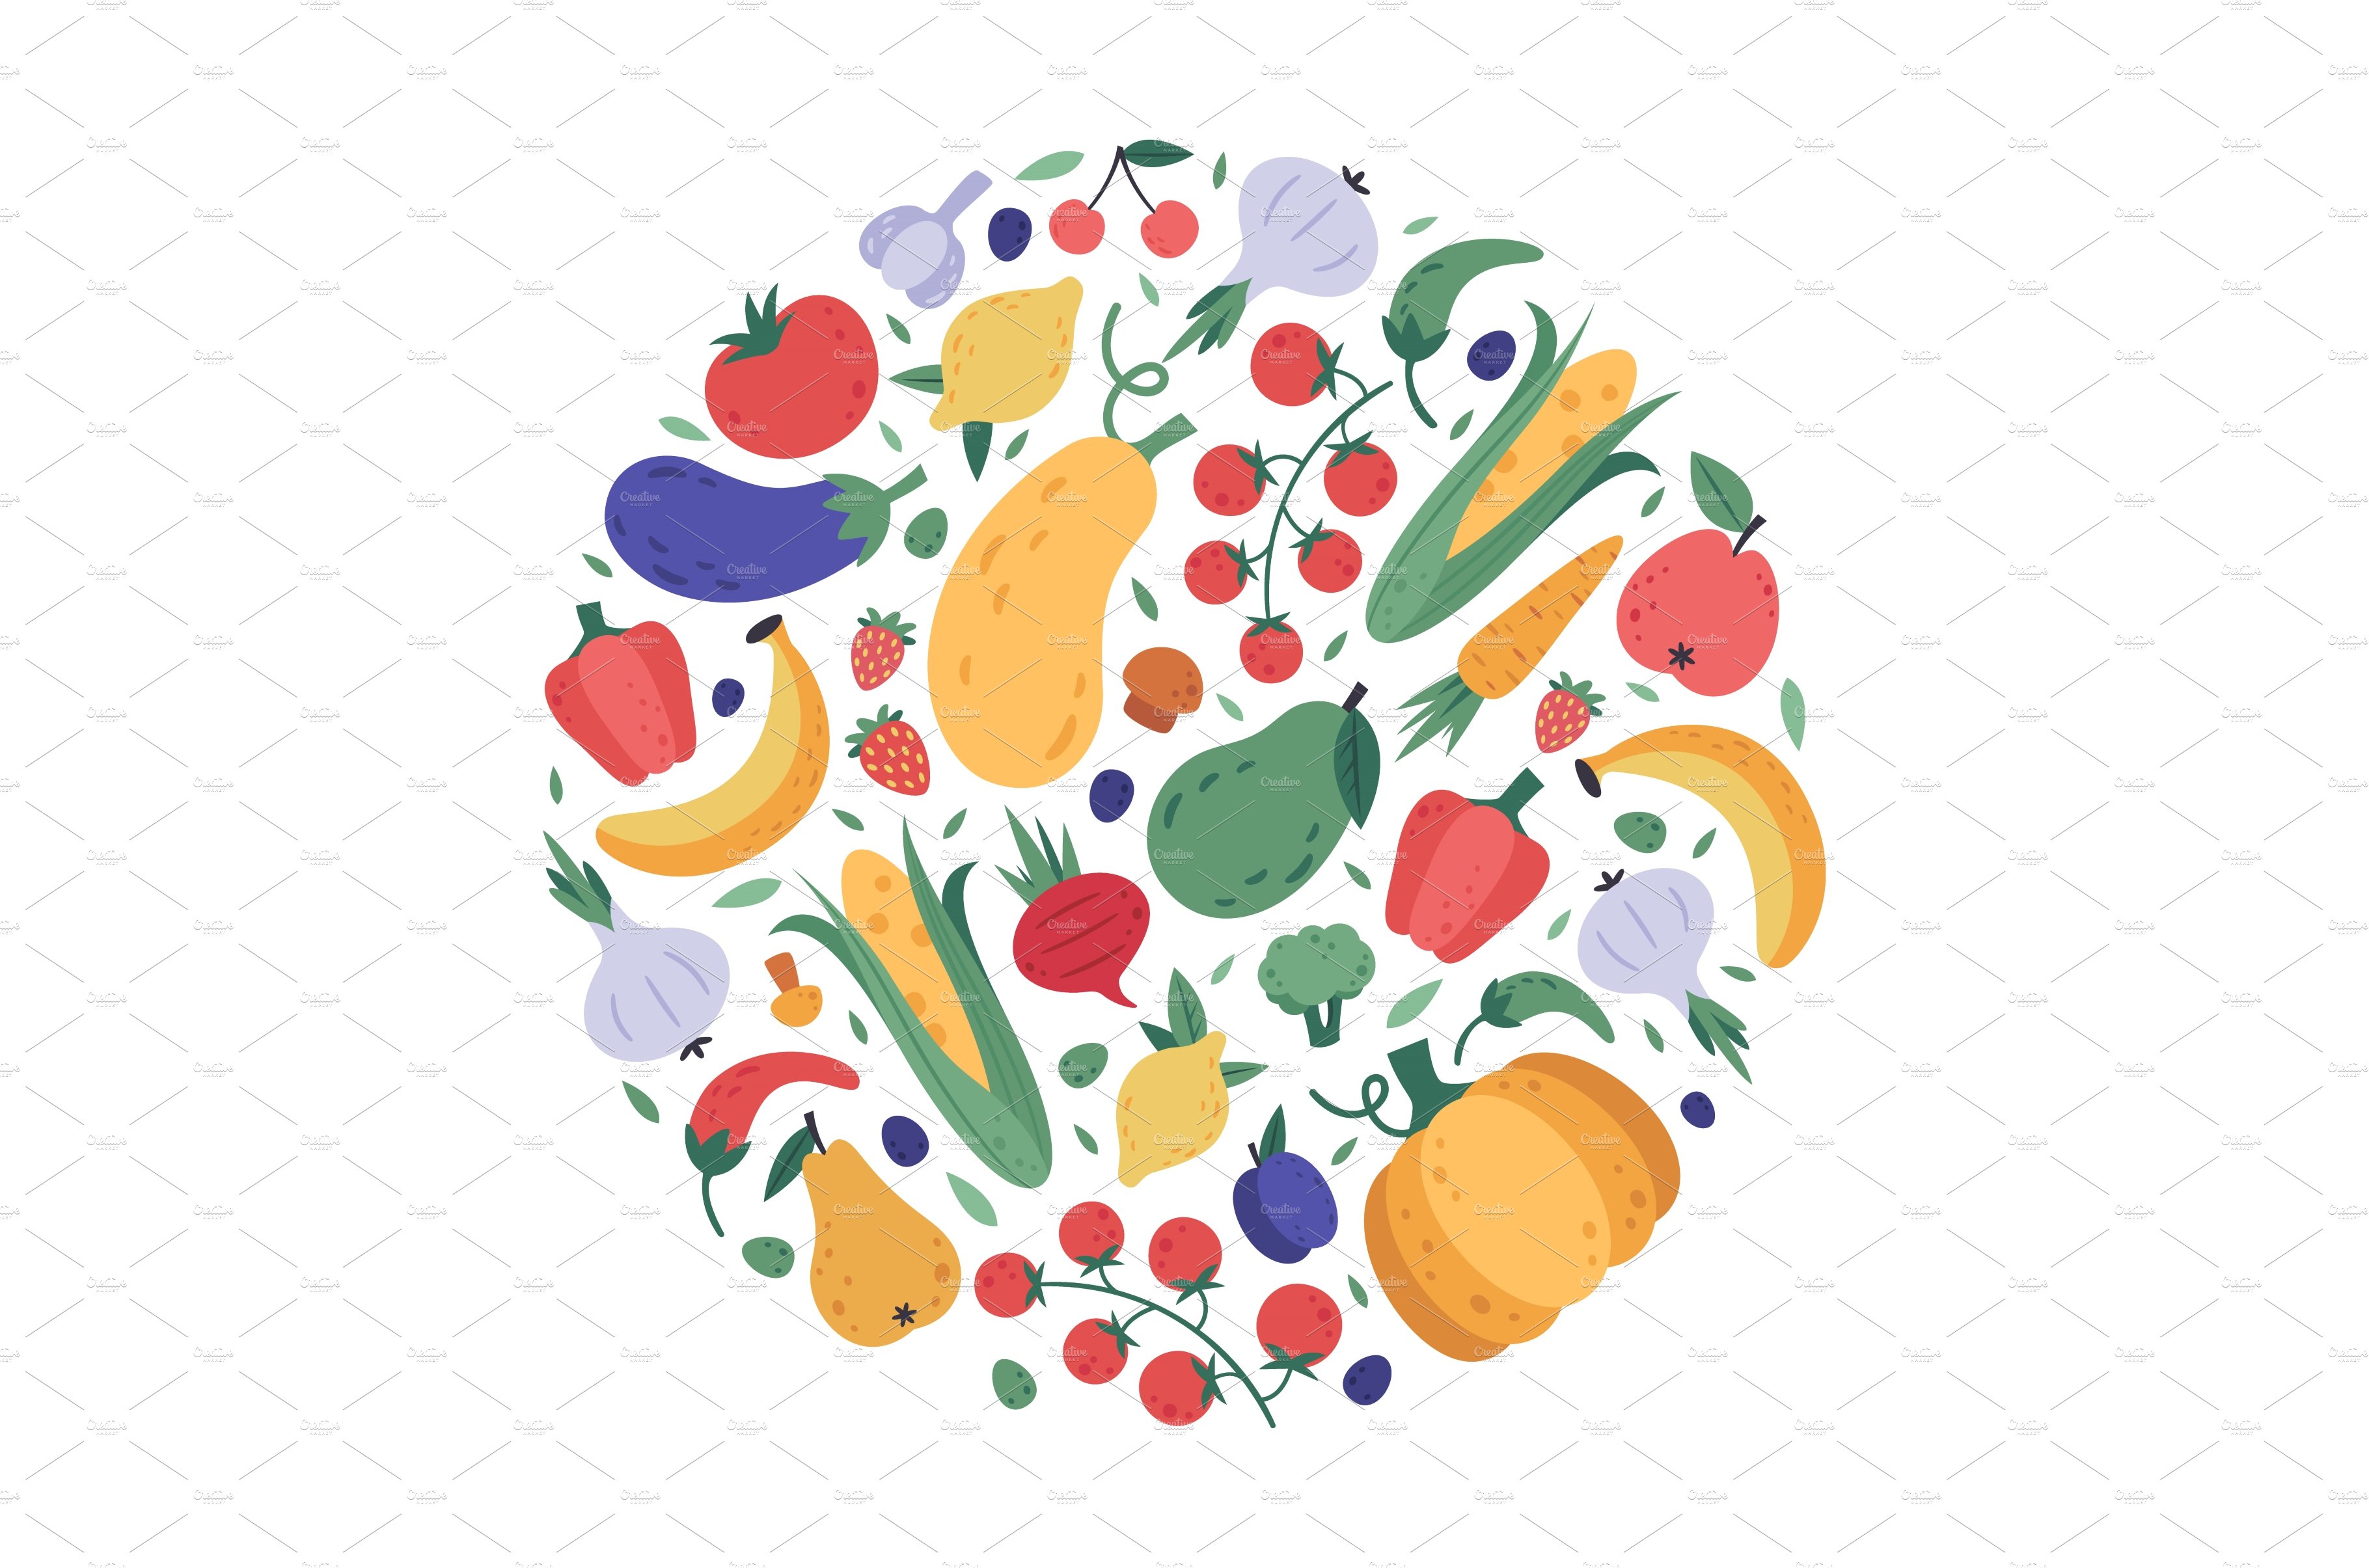 Vegetables and fruits pattern cover image.